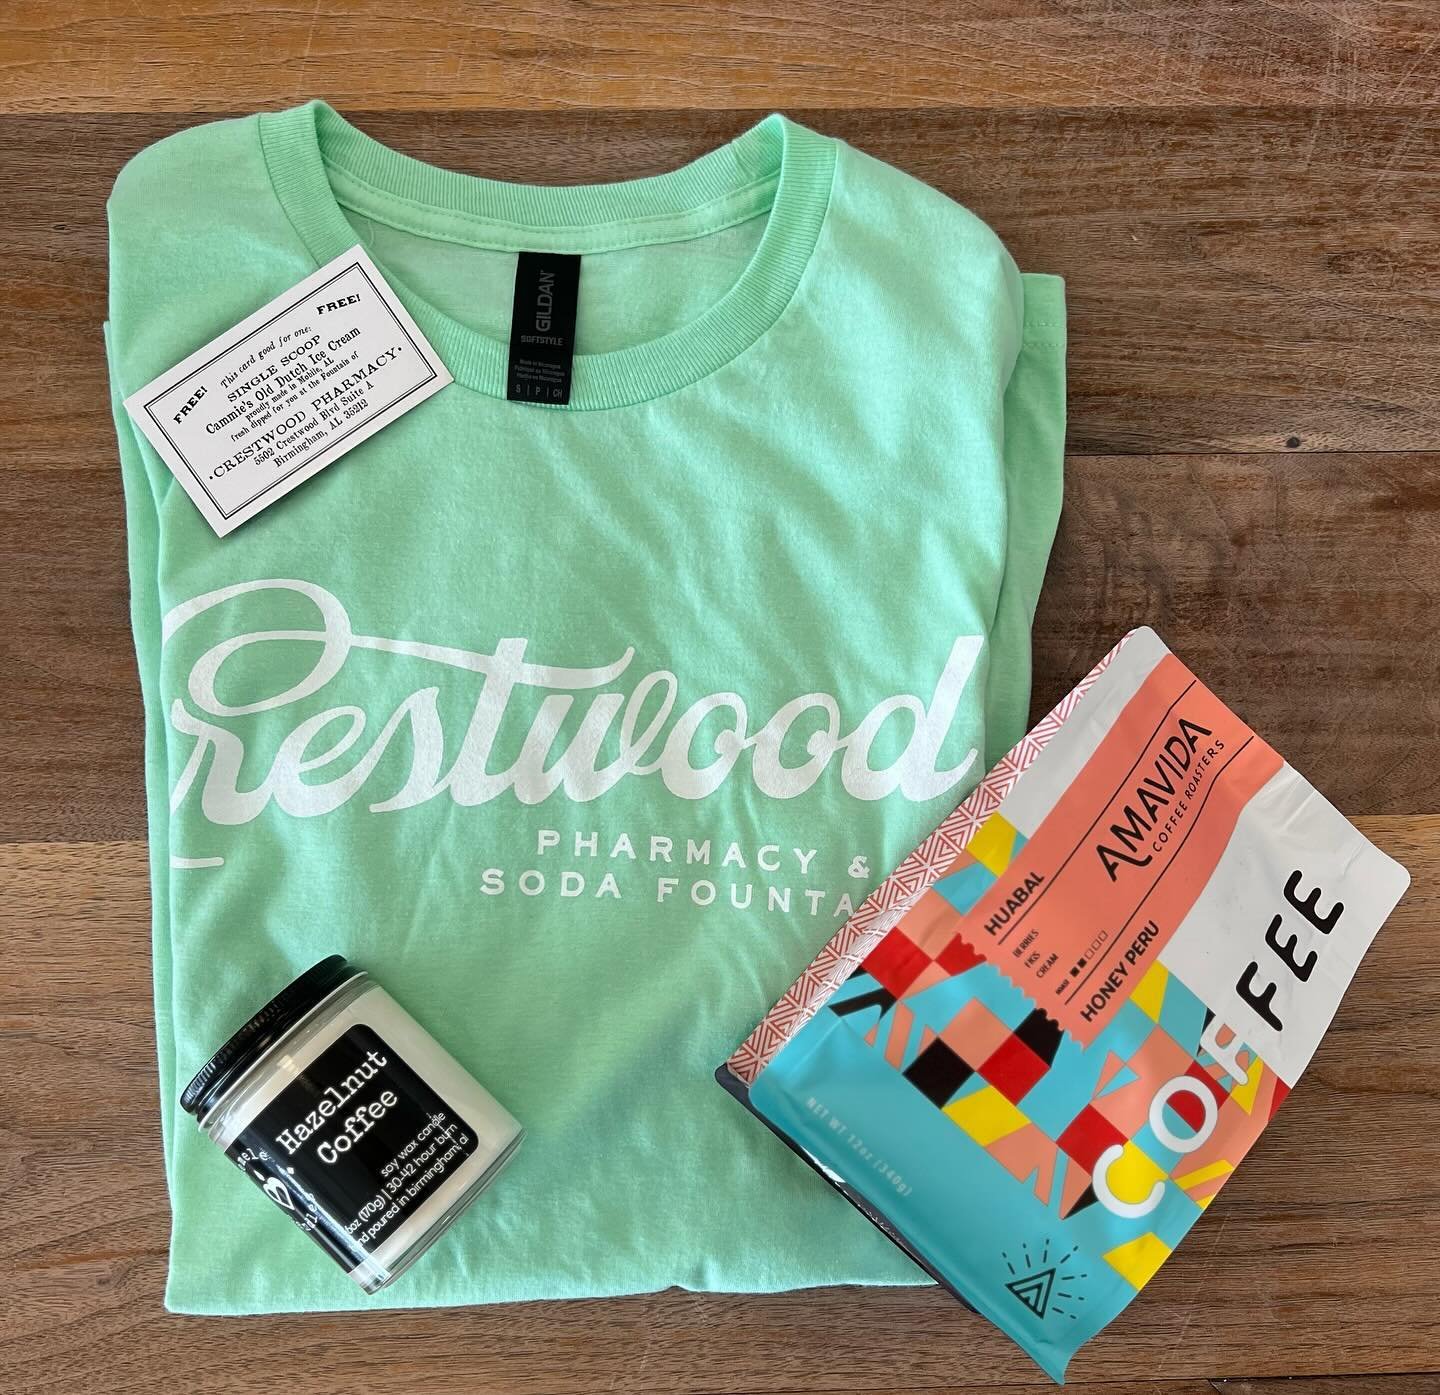 🌻SPRING GIVEAWAY 🌻 because we could all use a little sunshine and warmth this week! 

Enter to win a CPSF t-shirt, a @bemelecandles candle, 1 bag of @amavidacoffee and a free scoop card! How to enter below ⬇️ 

1. Like this post! 👍🏼
2. Follow our